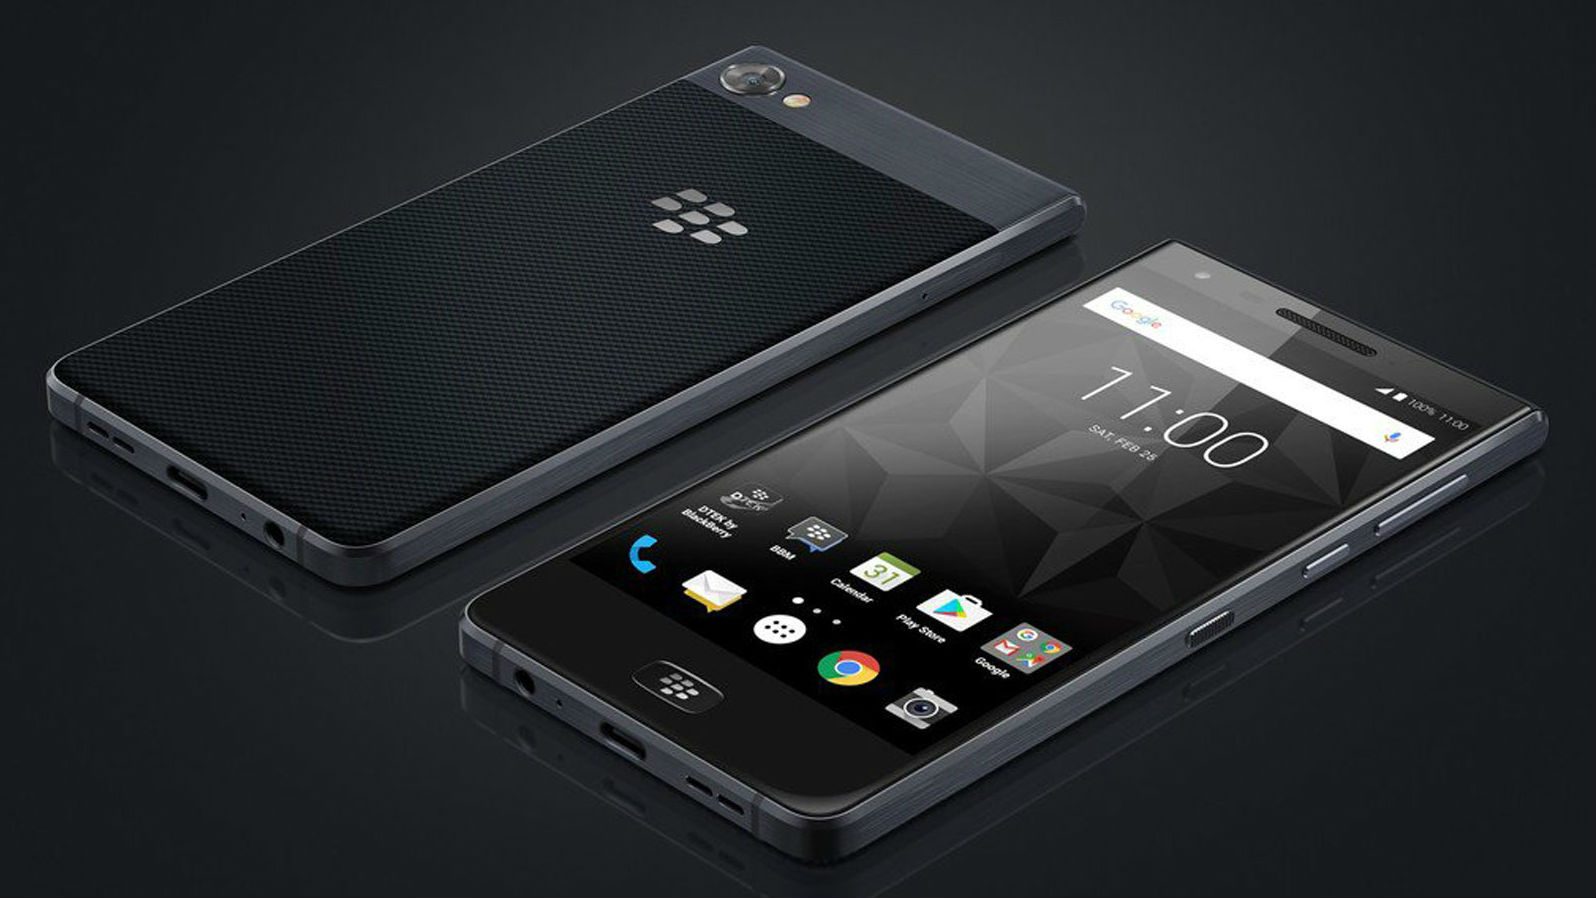 New Blackberry phone ditches iconic keyboard